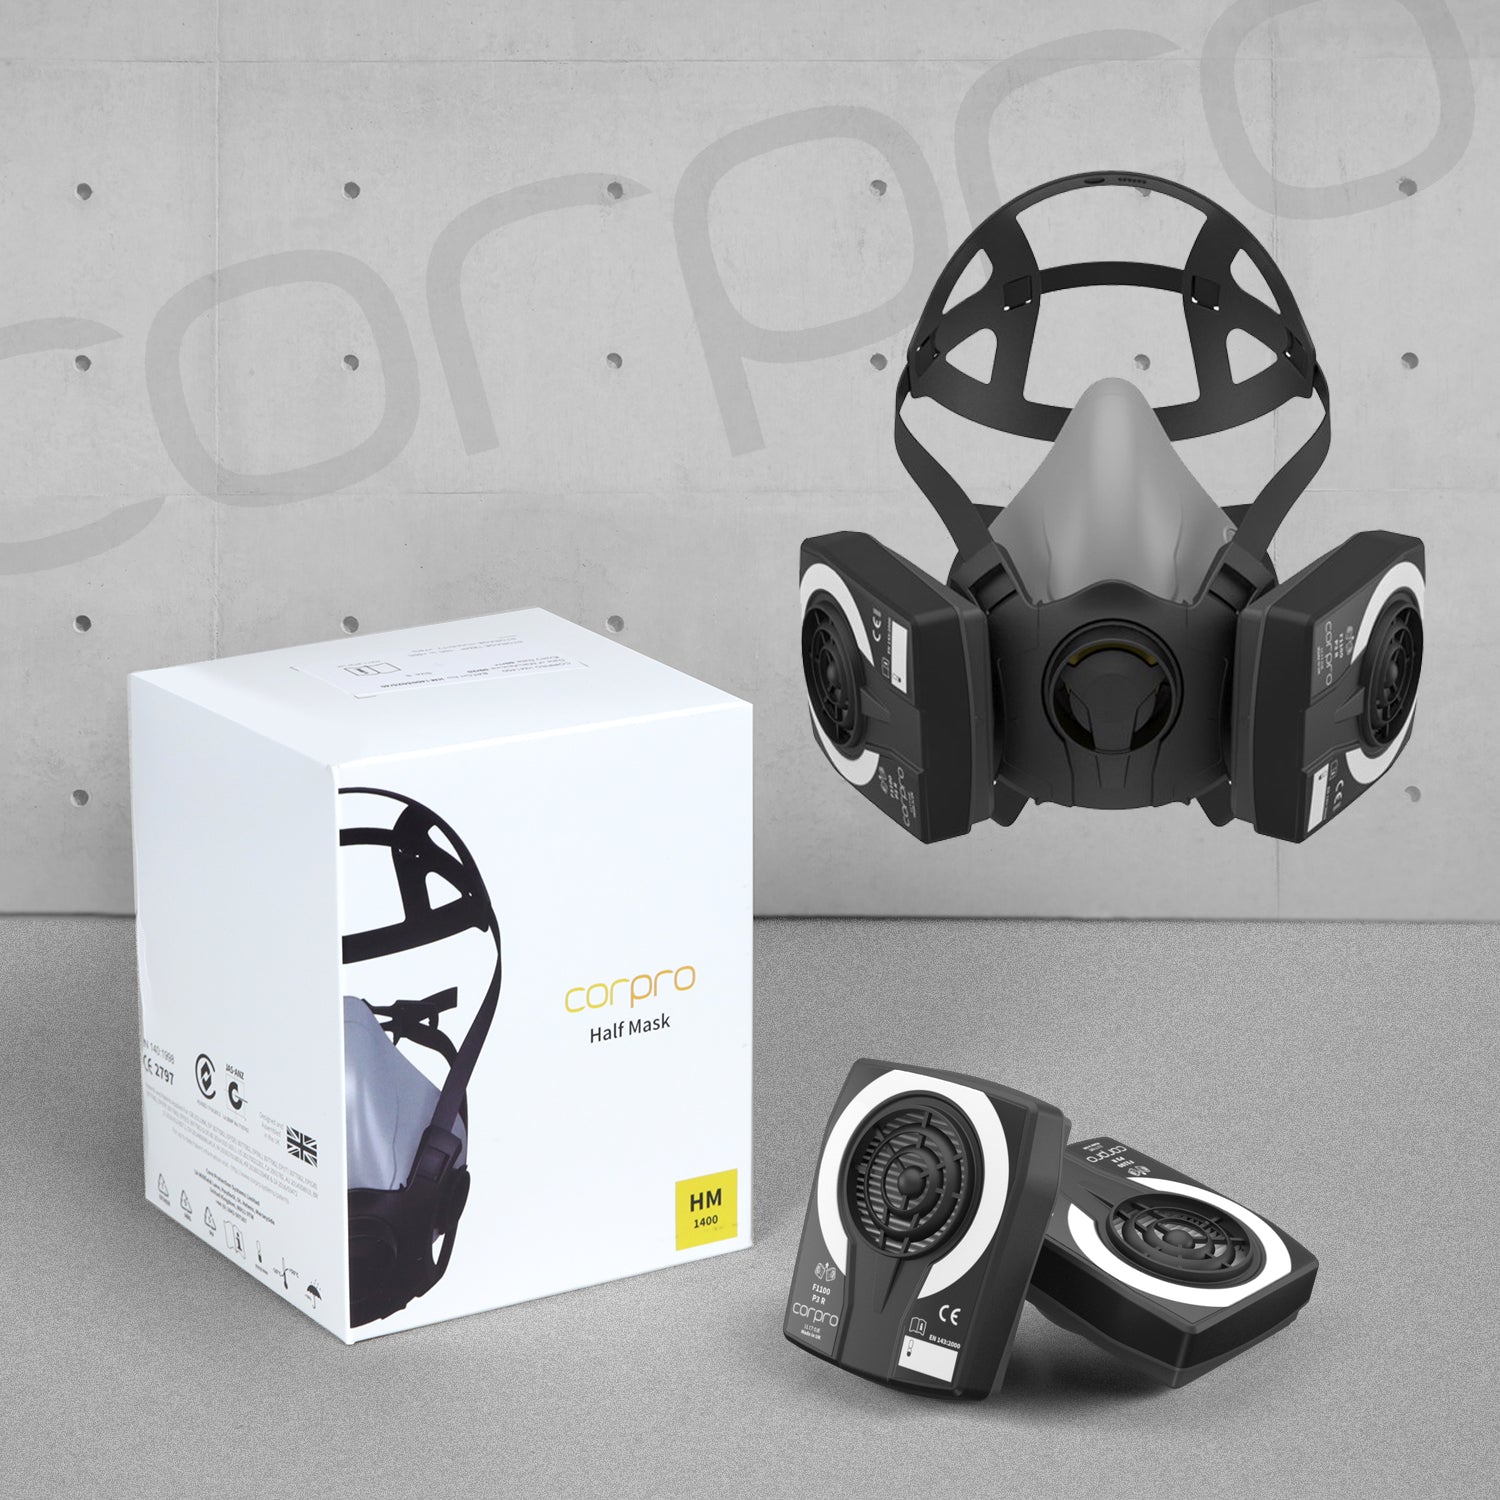 Corpro - Half Face Mask HM1400 - Small, Medium & Large Available